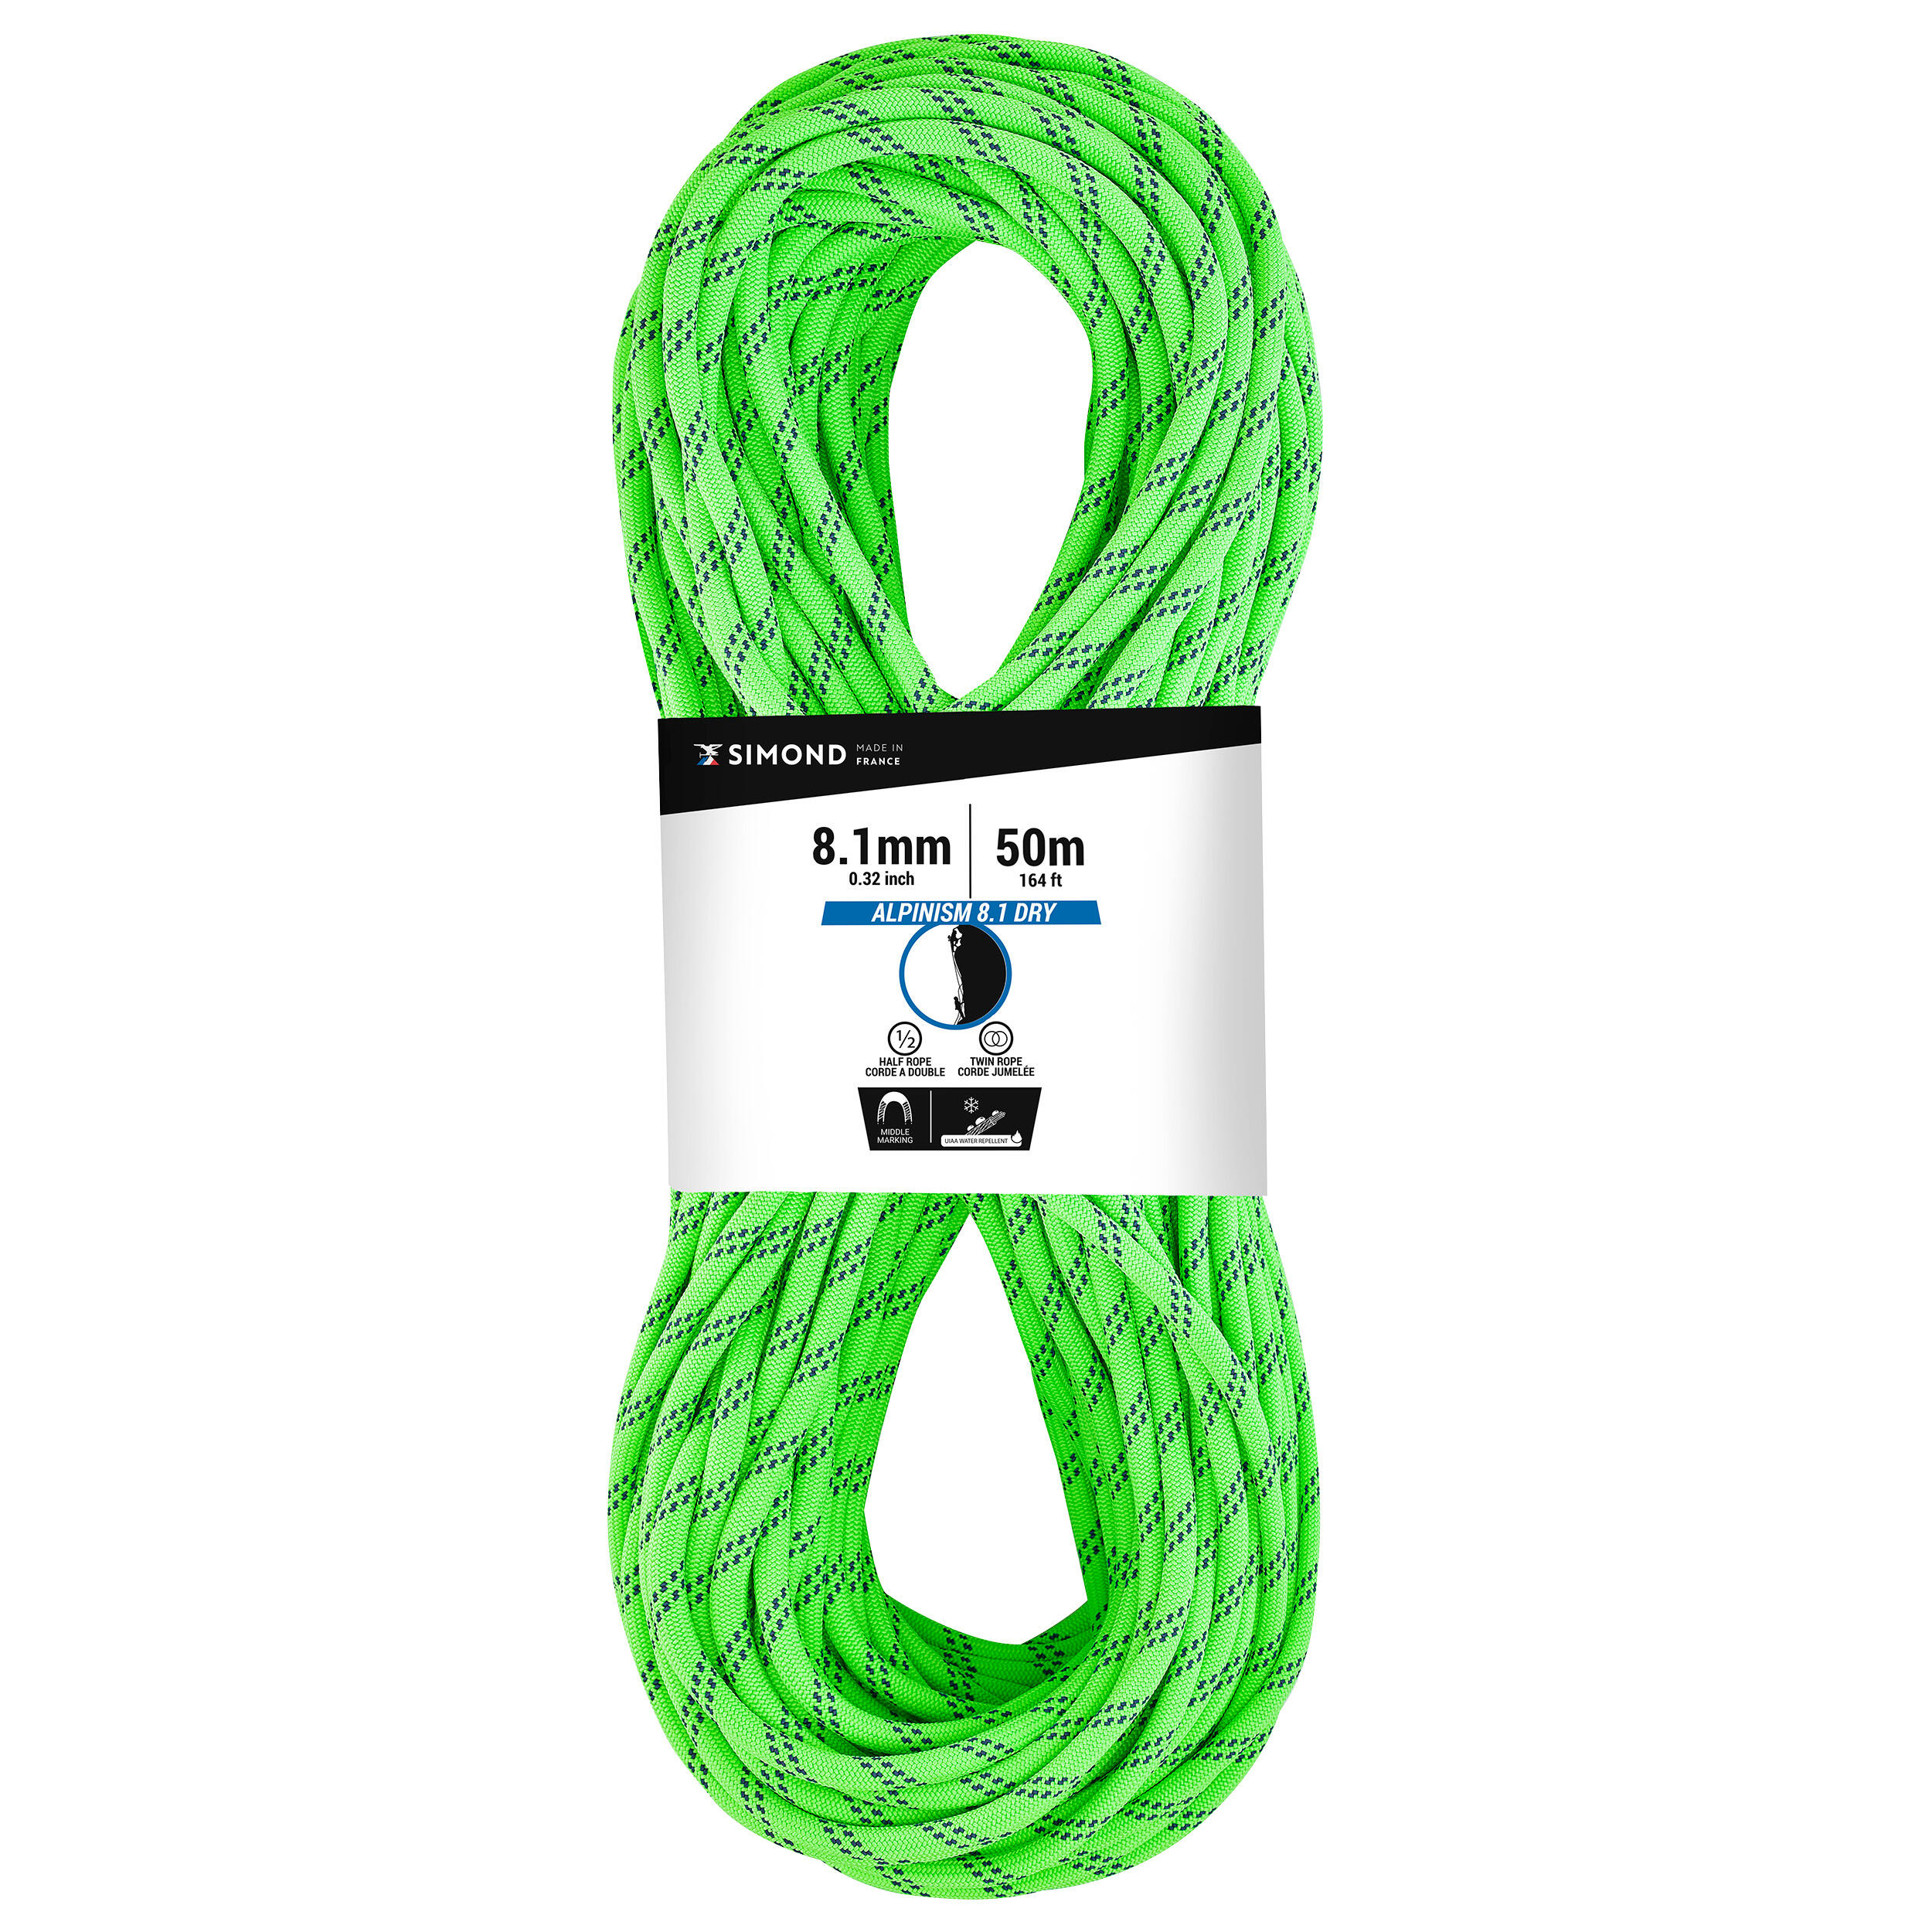 MOUNTAINEERING AND CLIMBING HALF ROPE - ABSEIL ALPINISM 8.1 MM X 50M GREEN 1/4